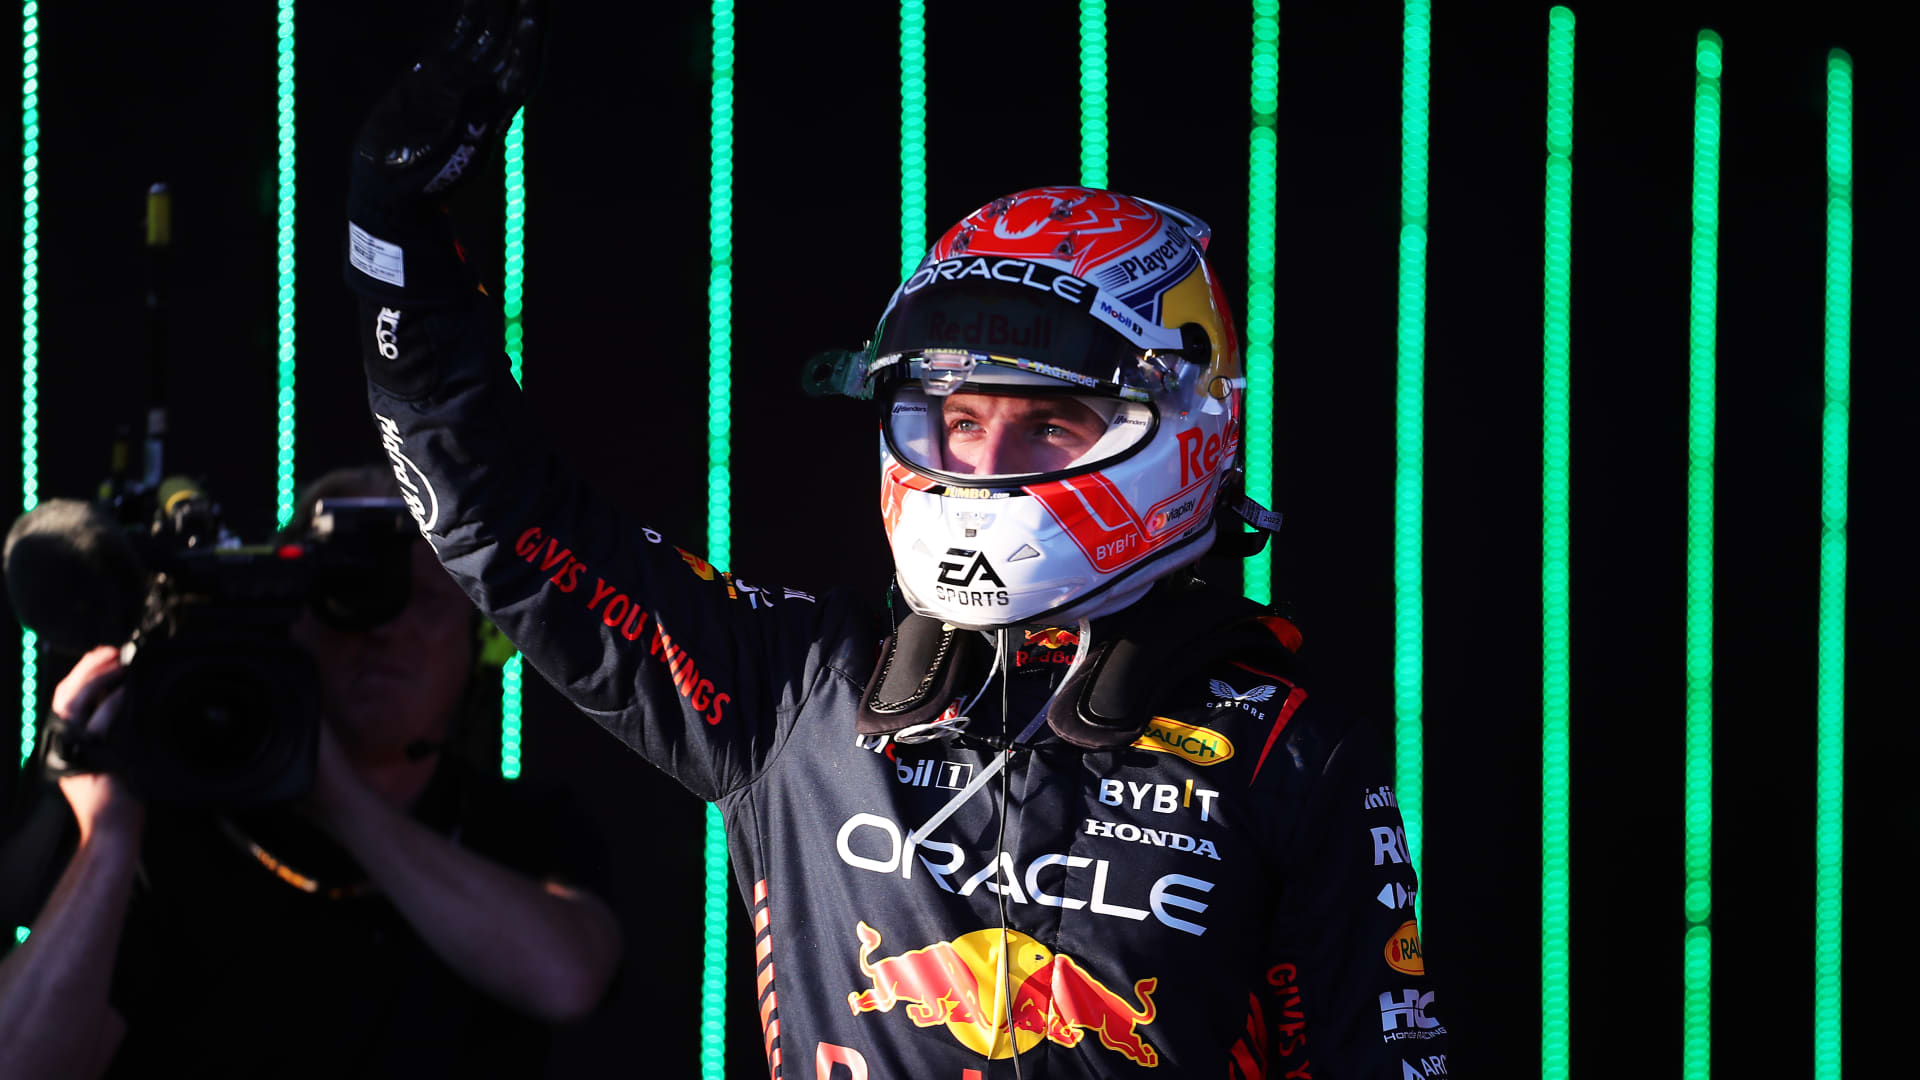 Australian GP: Max Verstappen holds off Lewis Hamilton for victory after wild finish to chaotic race